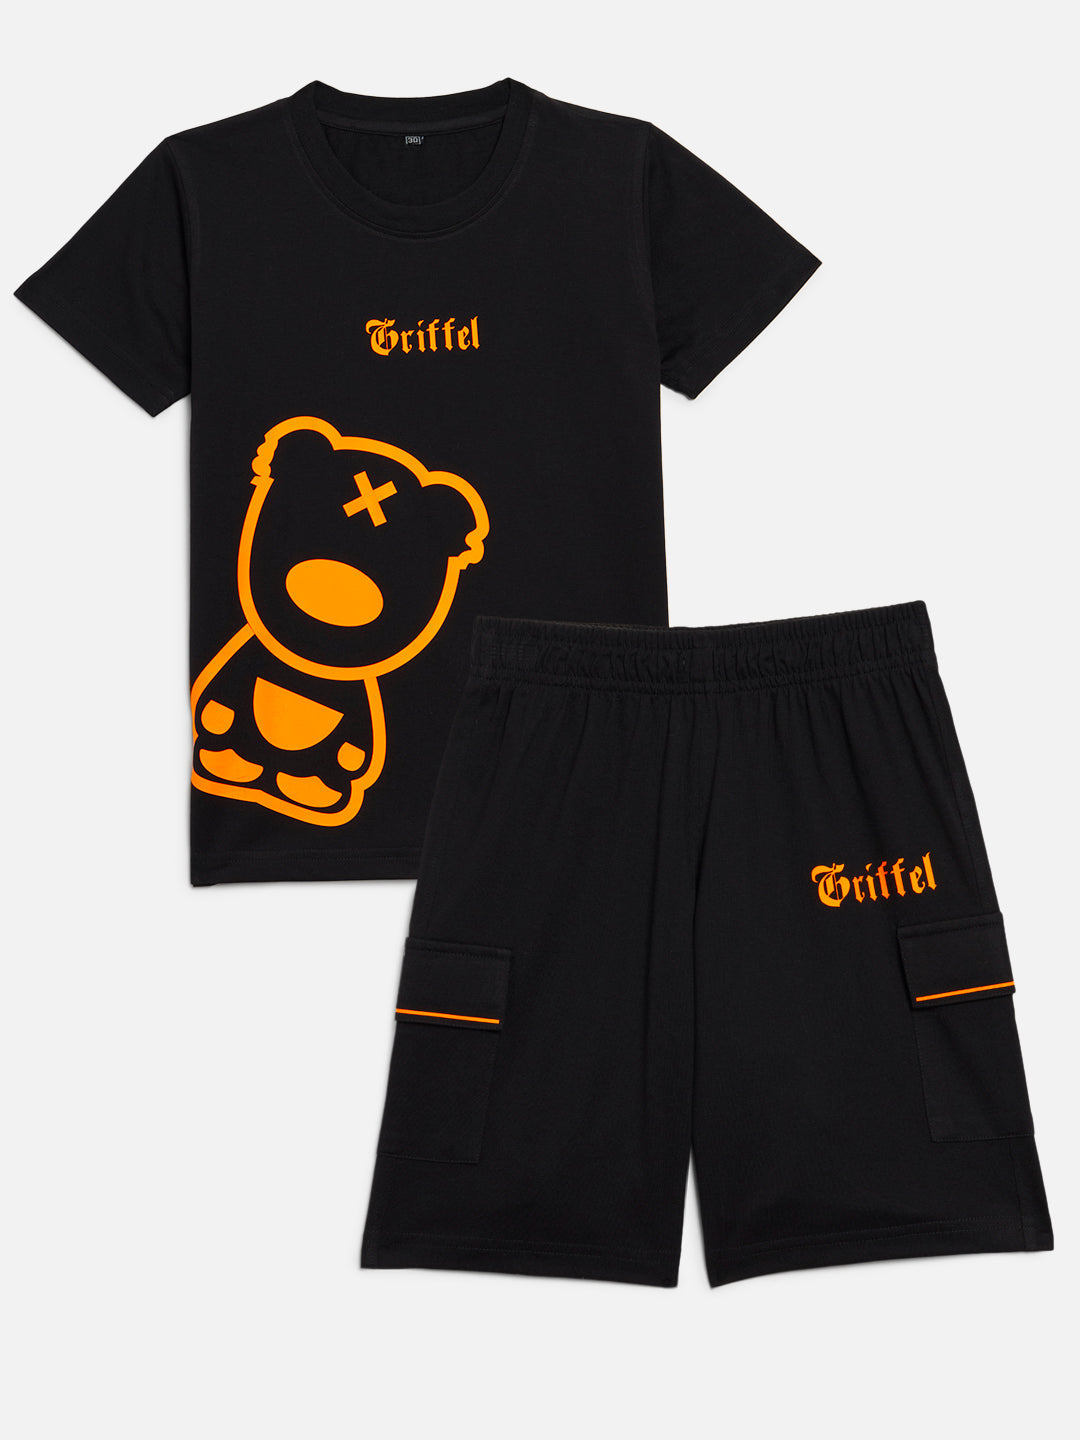 GRIFFEL Girls Kids Black Co-Ord T-shirt and Short Set - griffel